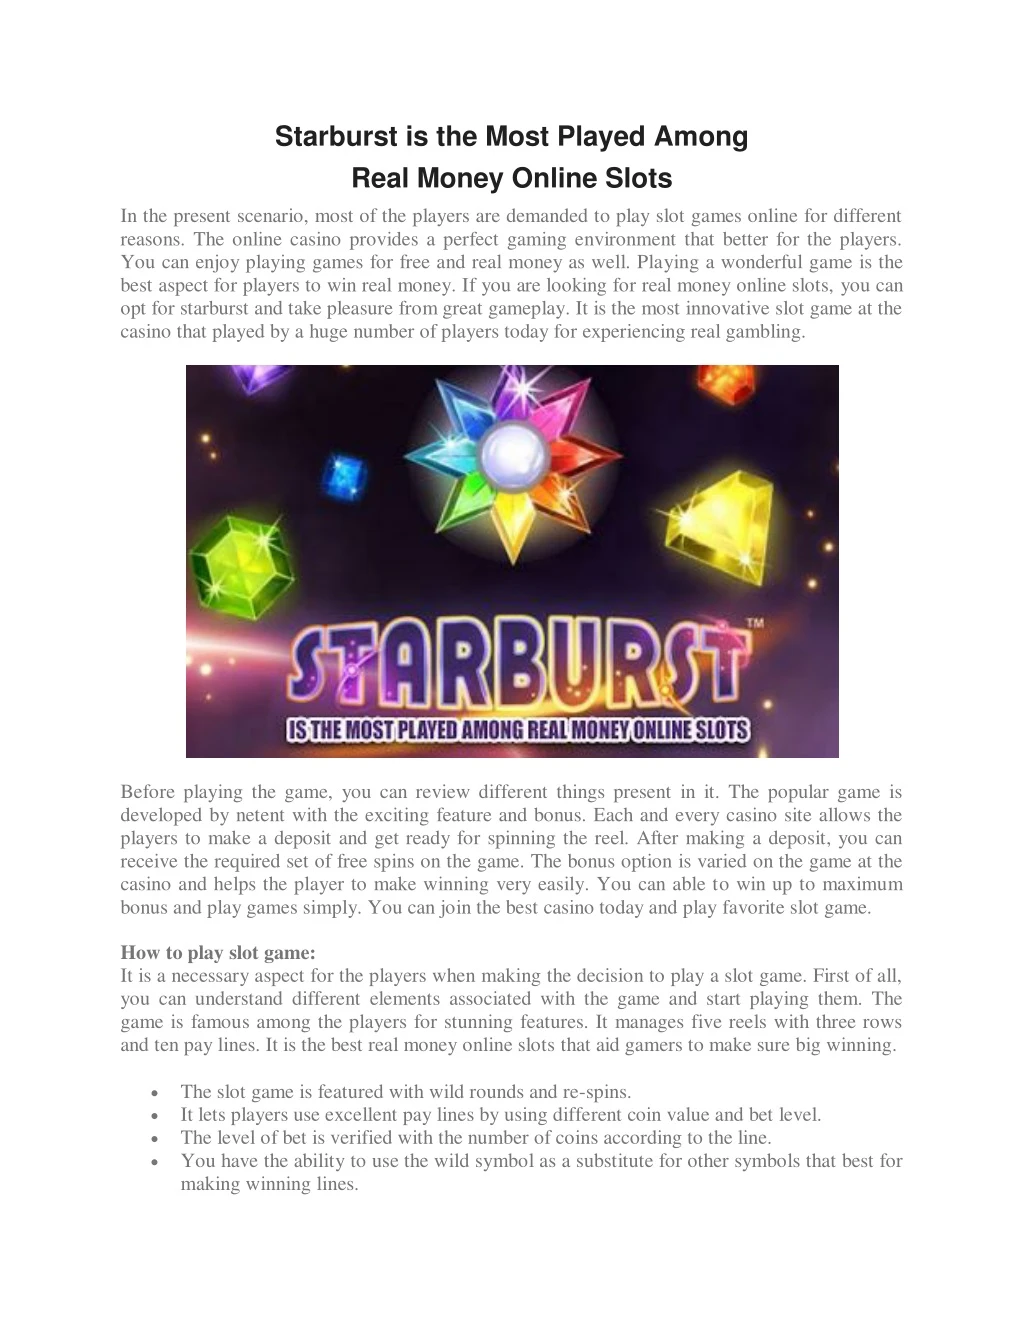 starburst is the most played among real money